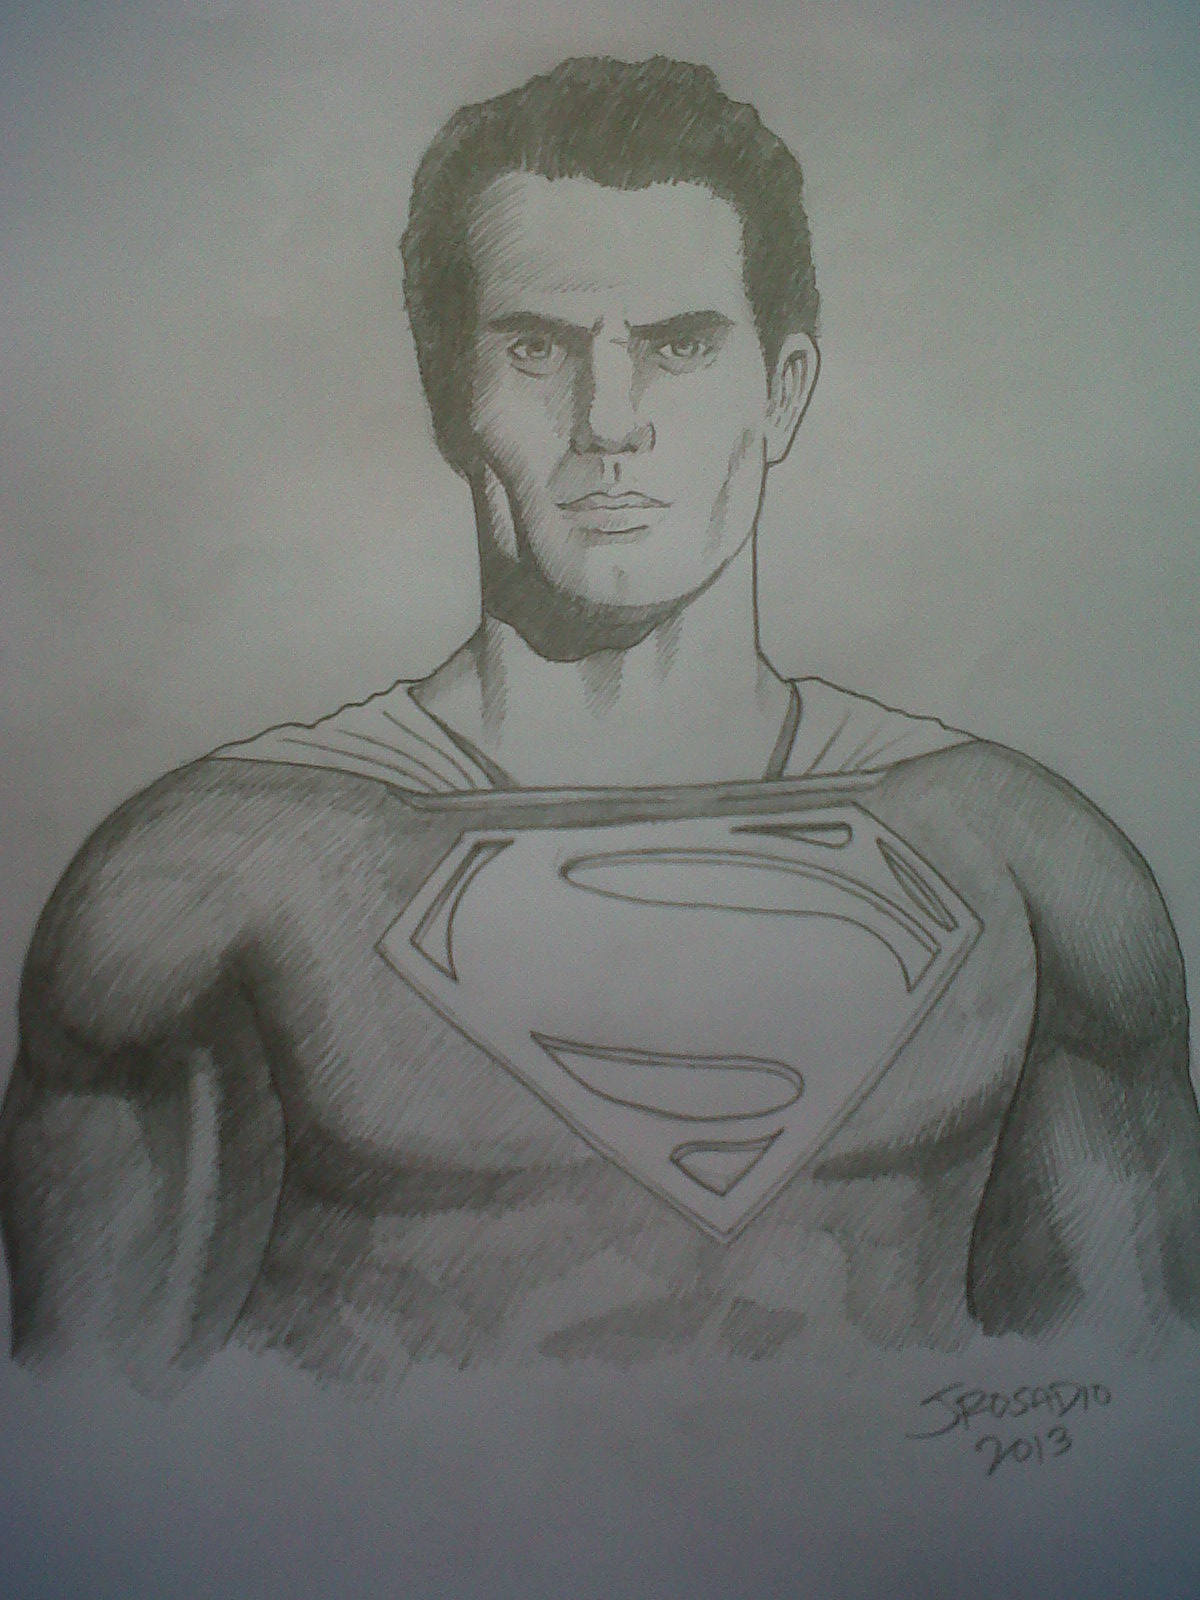 How To Draw The Man Of Steel, Man Of Steel, Step by Step, Drawing Guide, by  DuskEyes969 - DragoArt